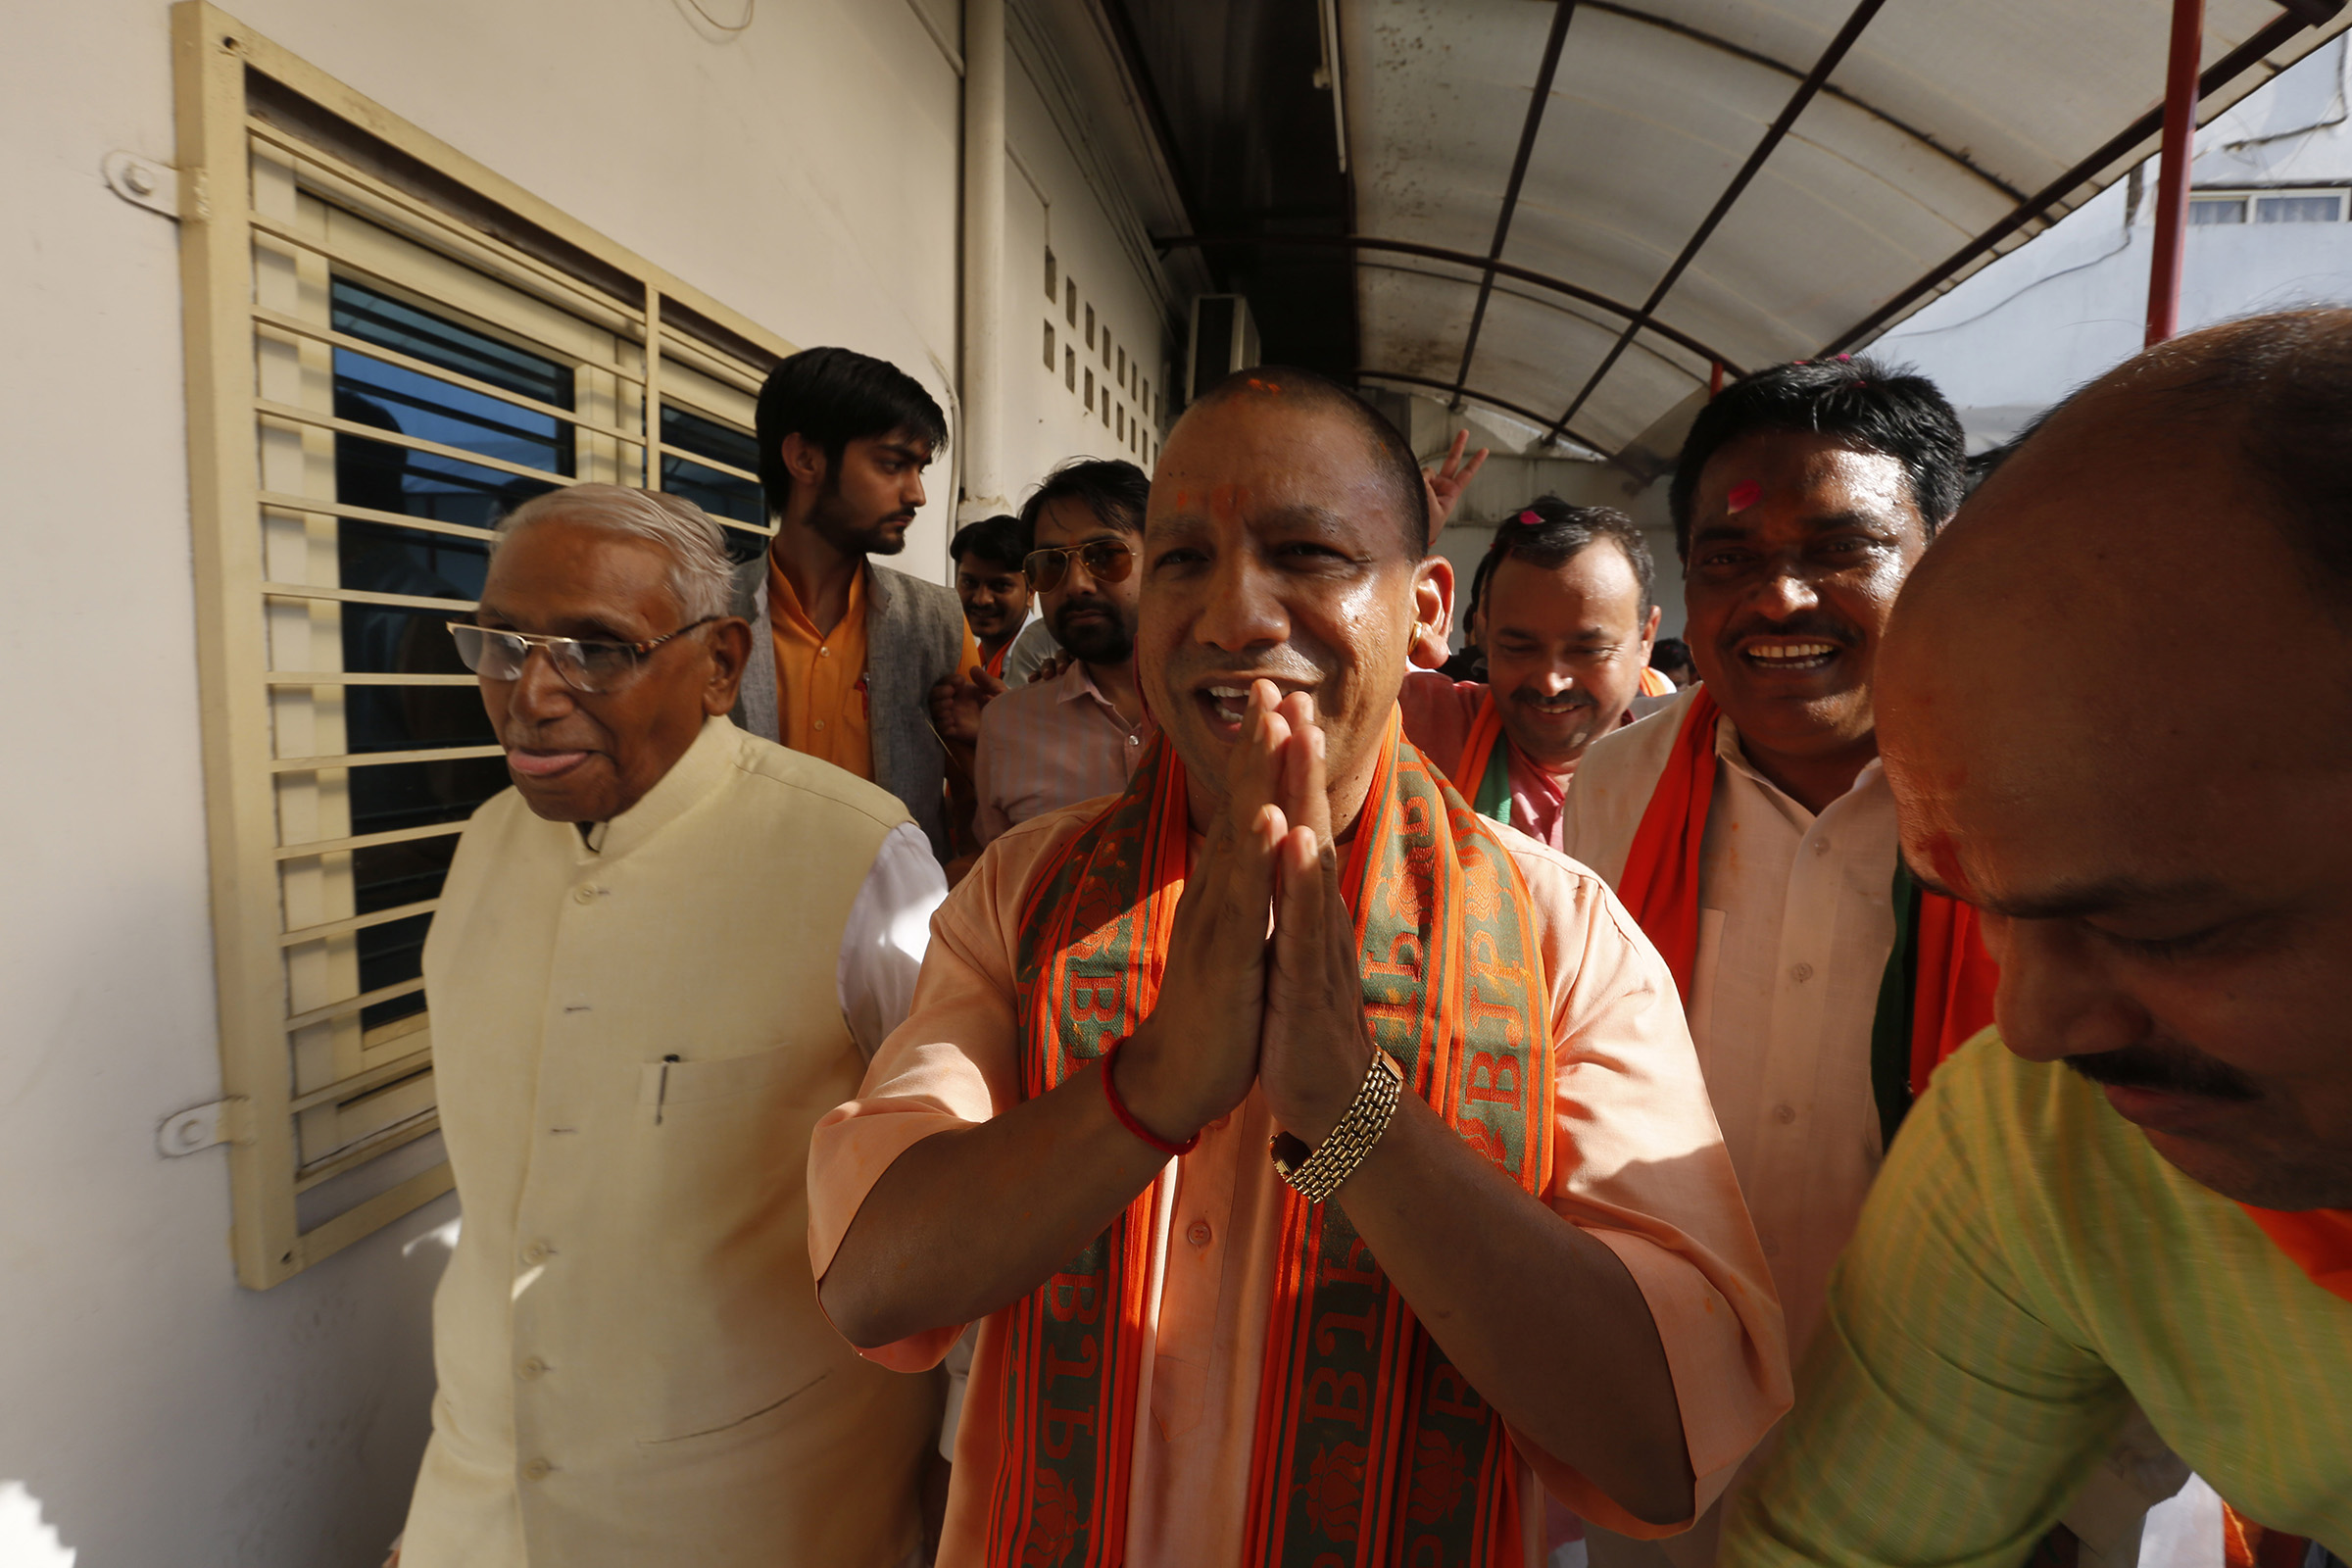 Chief Minister of Uttar Pradesh state Yogi Adityanath celebrates the party's victory in Lucknow, India, on May 23, 2019. (Rajesh Kumar Singh—AP)